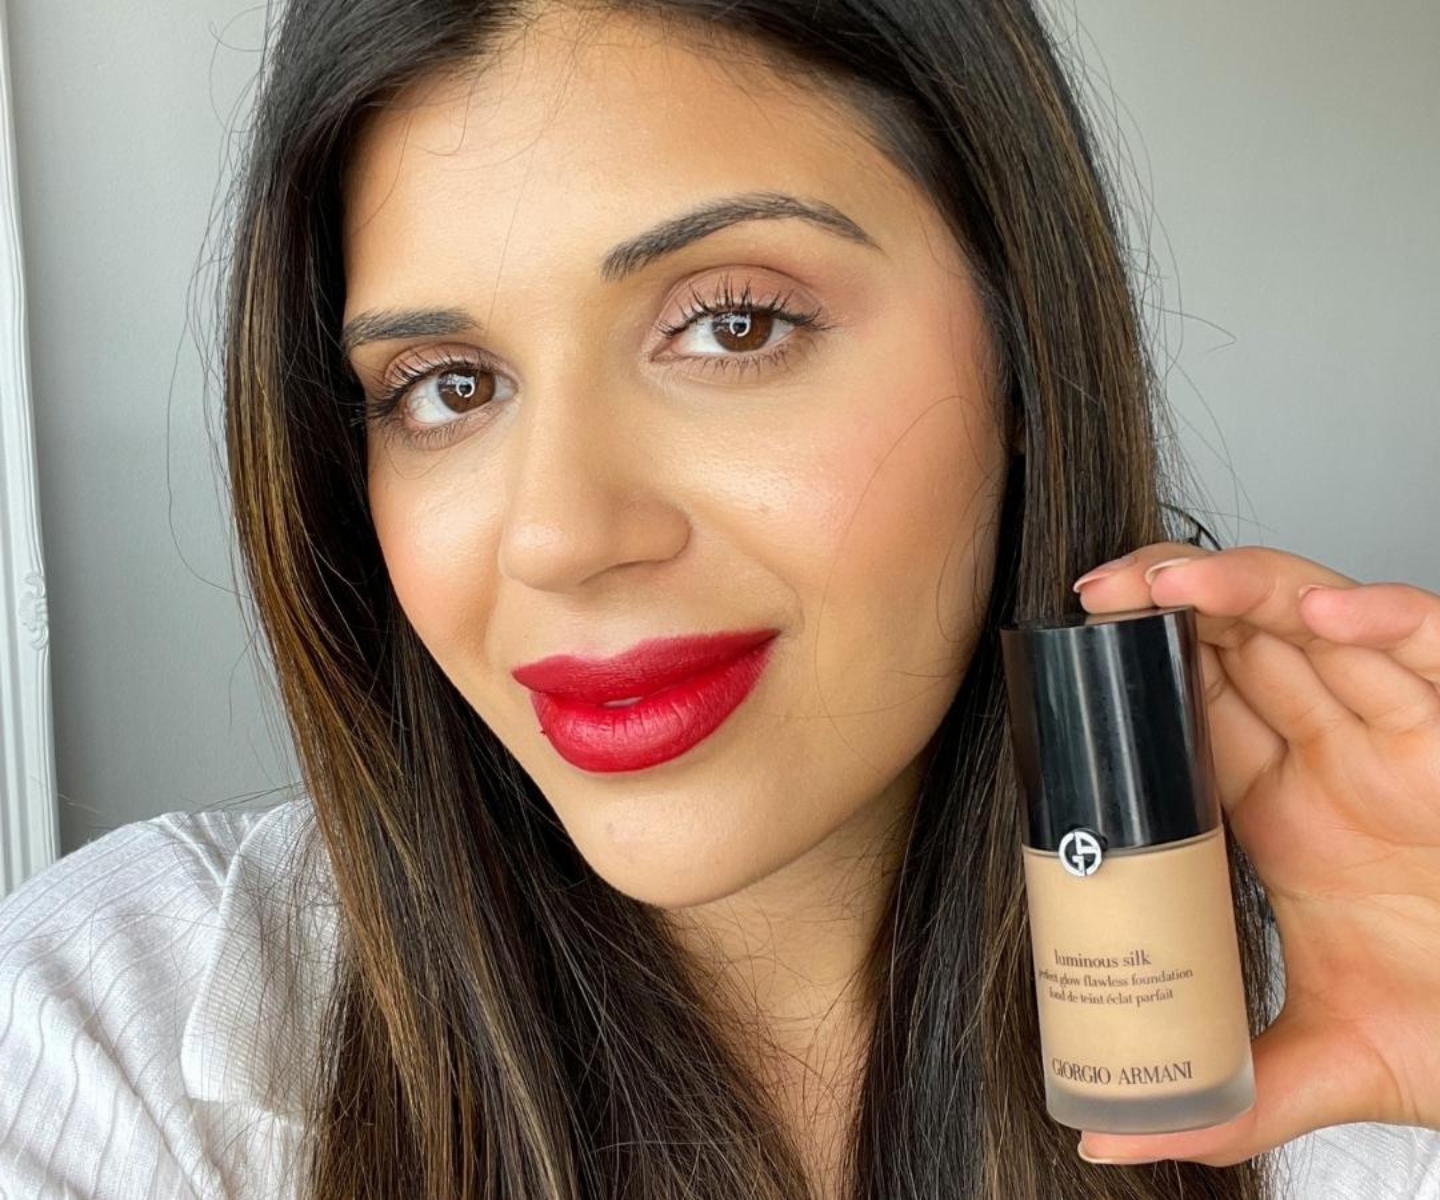 Is Giorgio Armani Foundation Really Worth the Hype? Here's Our Verdict...